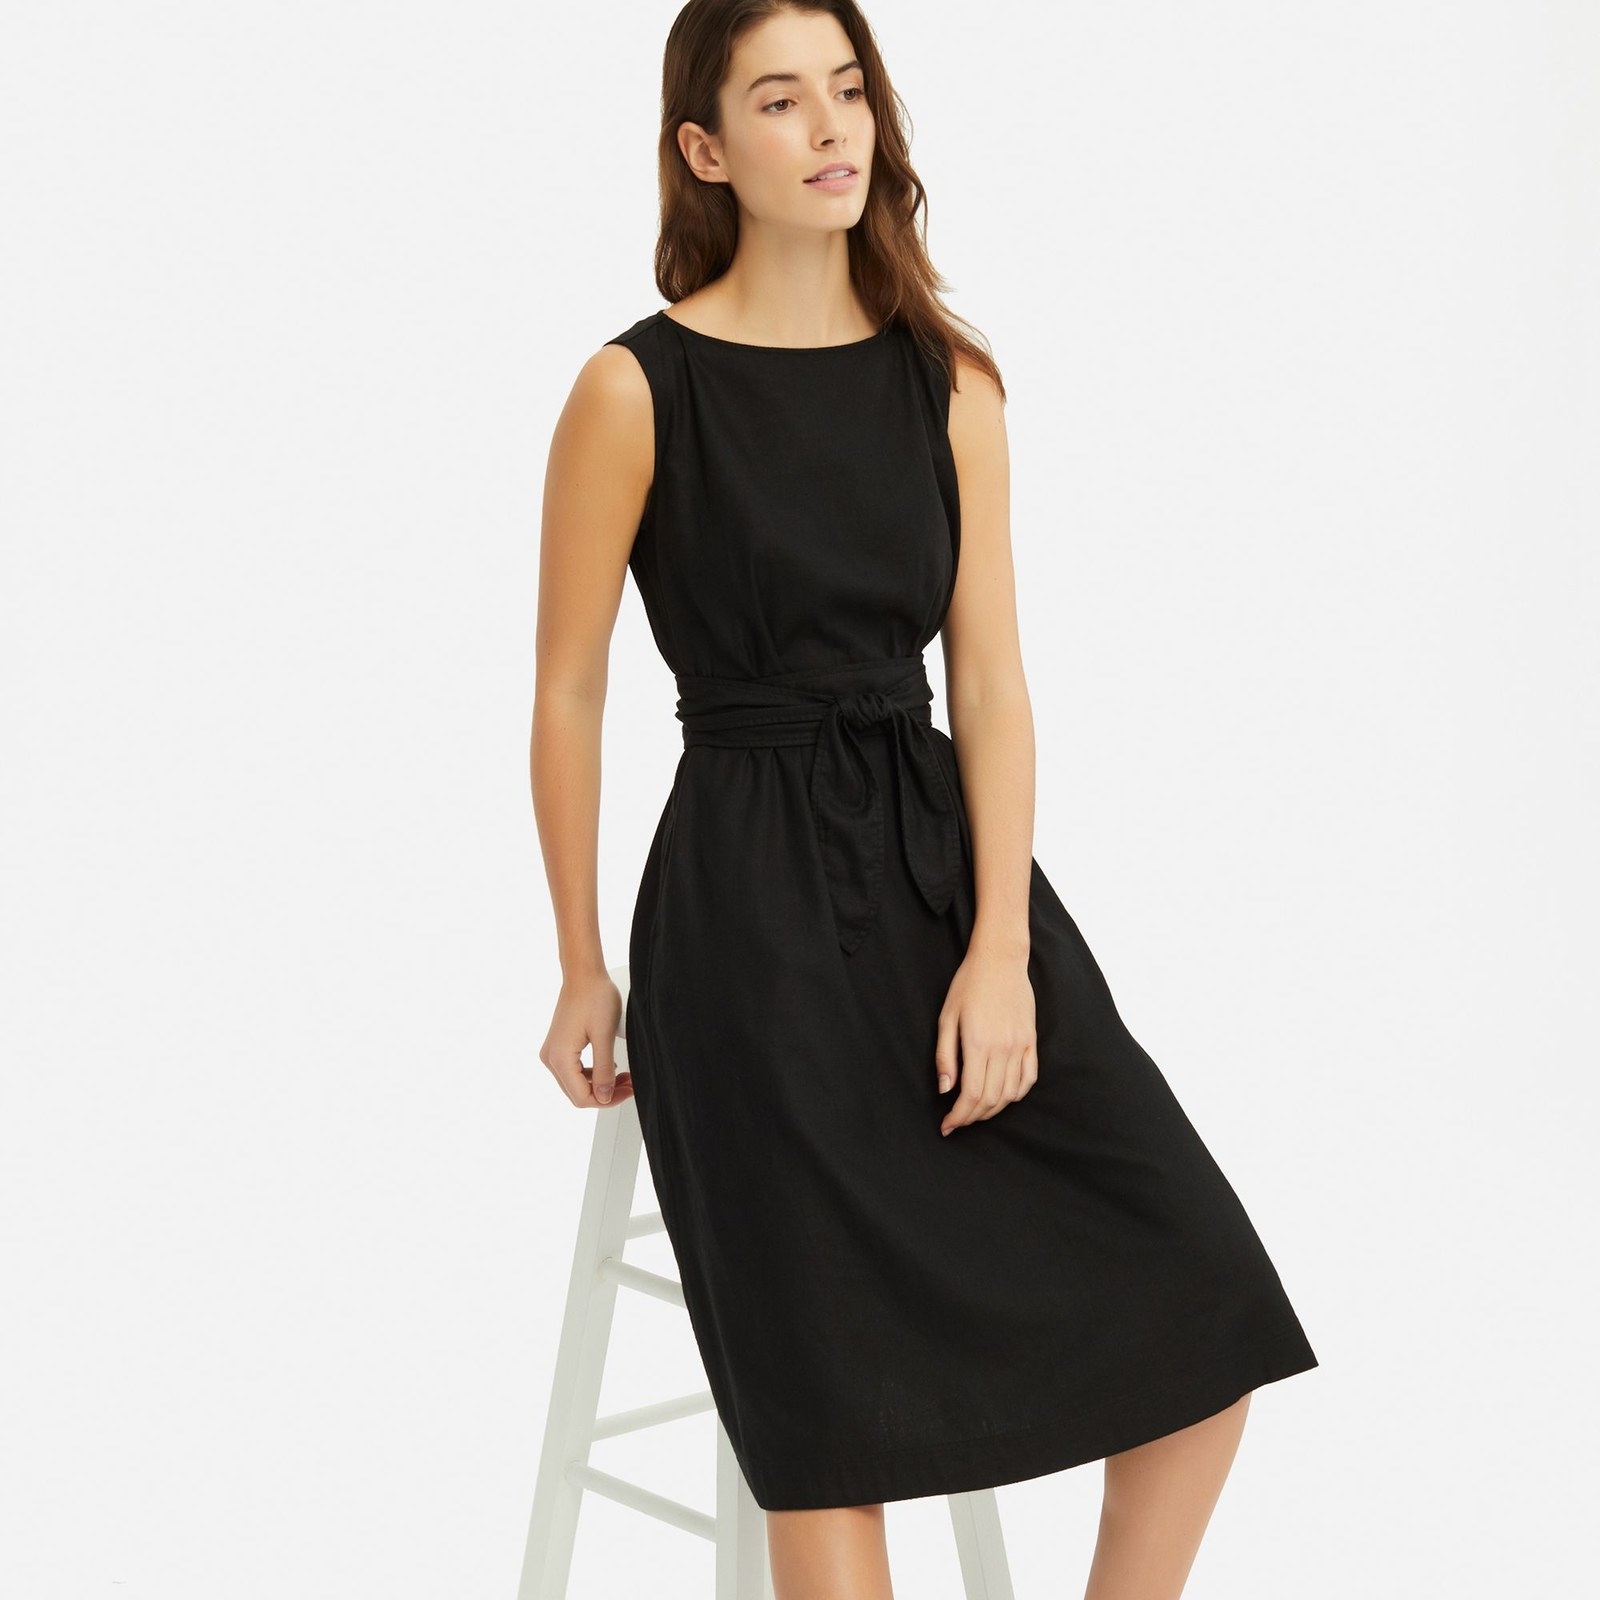 30 Stylish Summer Dresses That Only Look Expensive